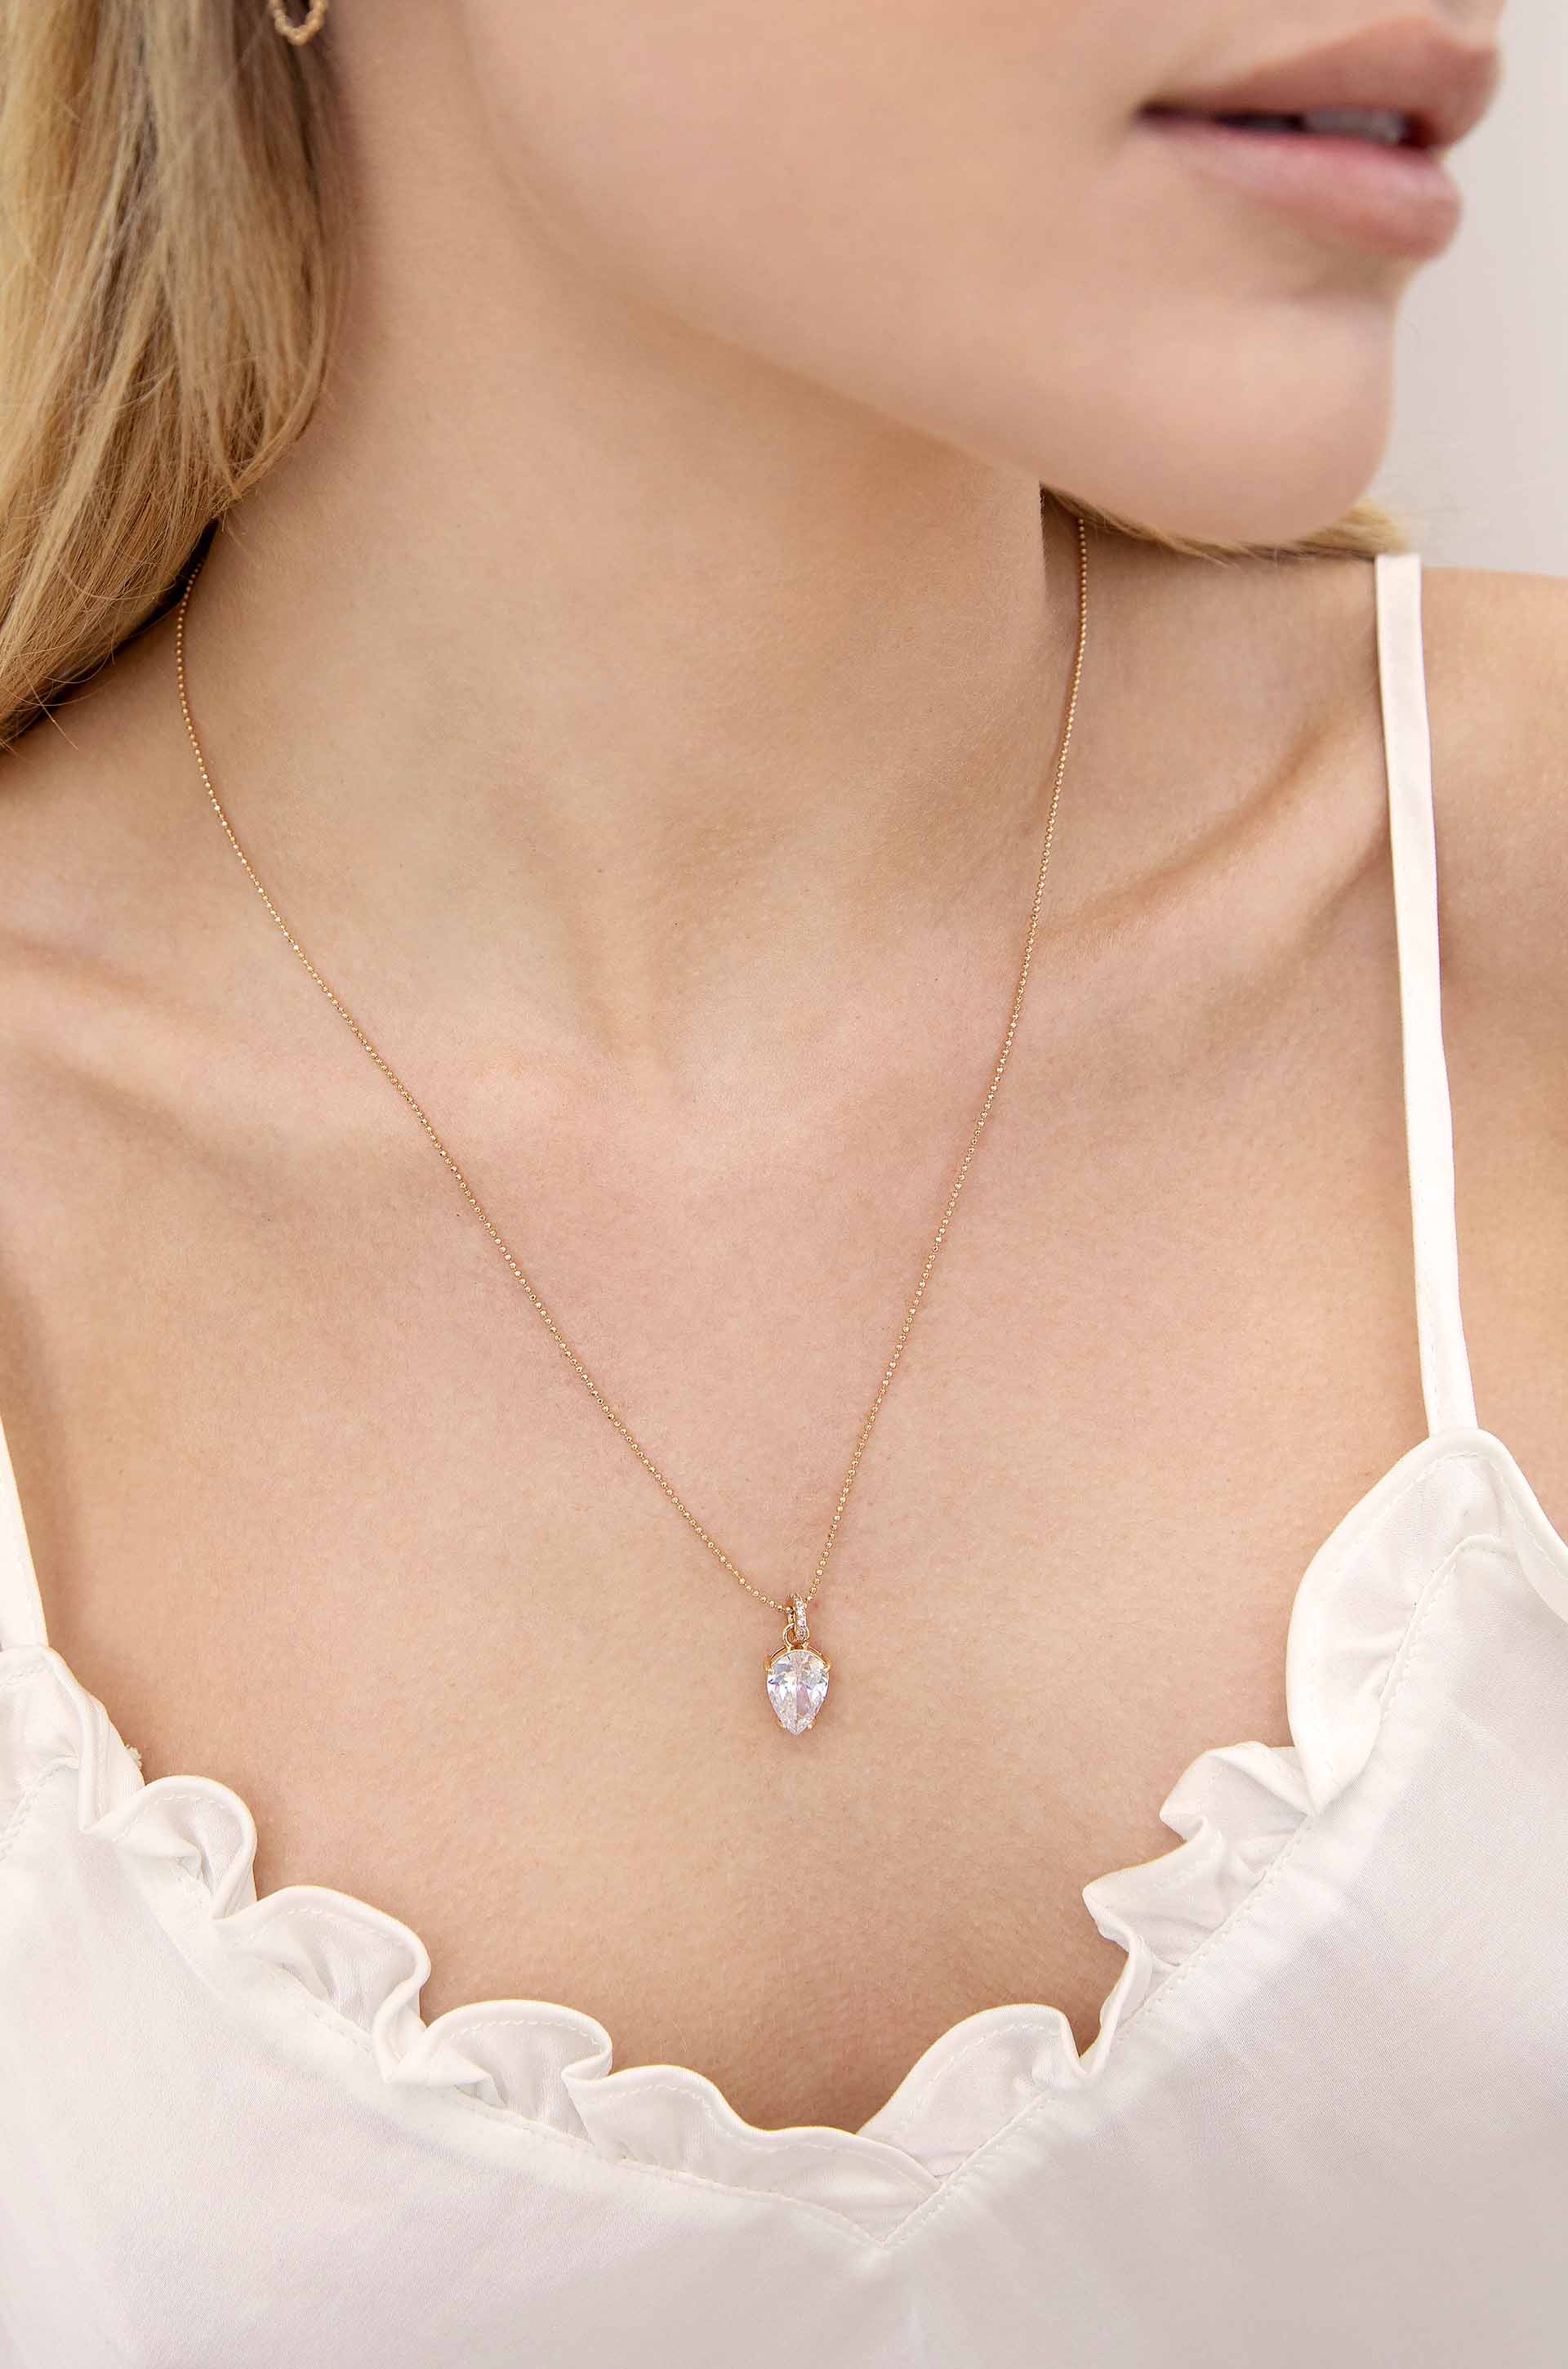 Thin and Delicate 18k Gold Plated Crystal Pendant Necklace on model